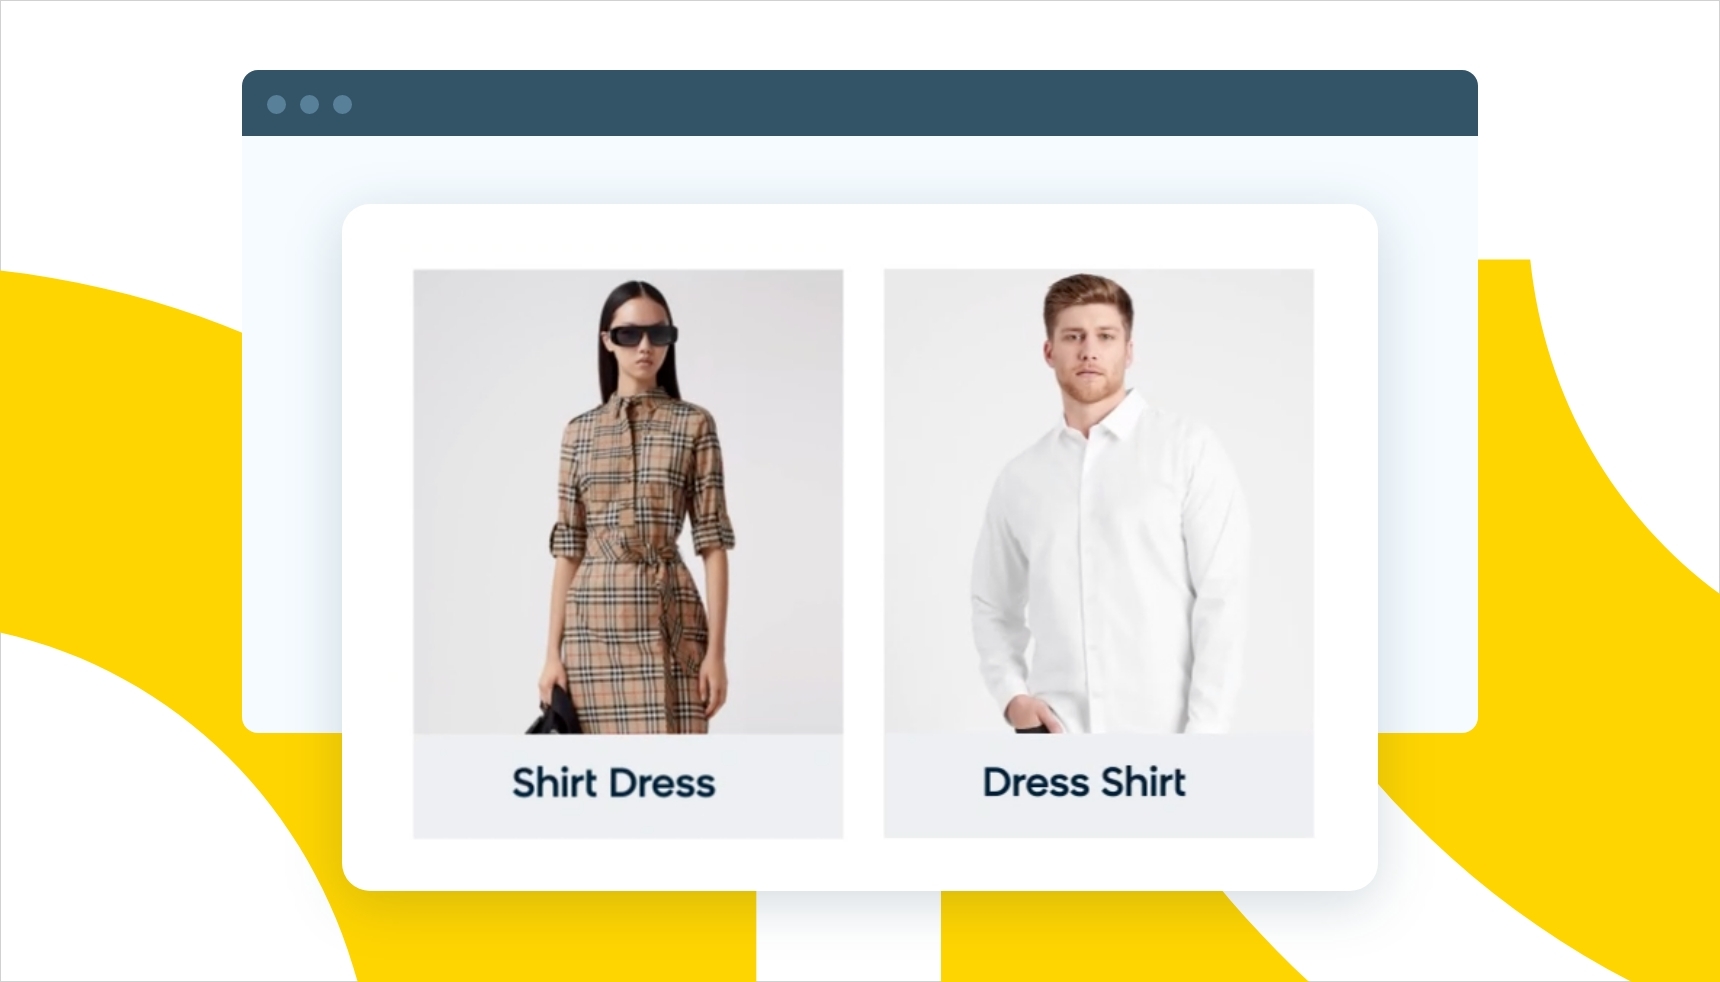 An example of intelligent search, which can understand the difference between a “shirt dress” and a “dress shirt”